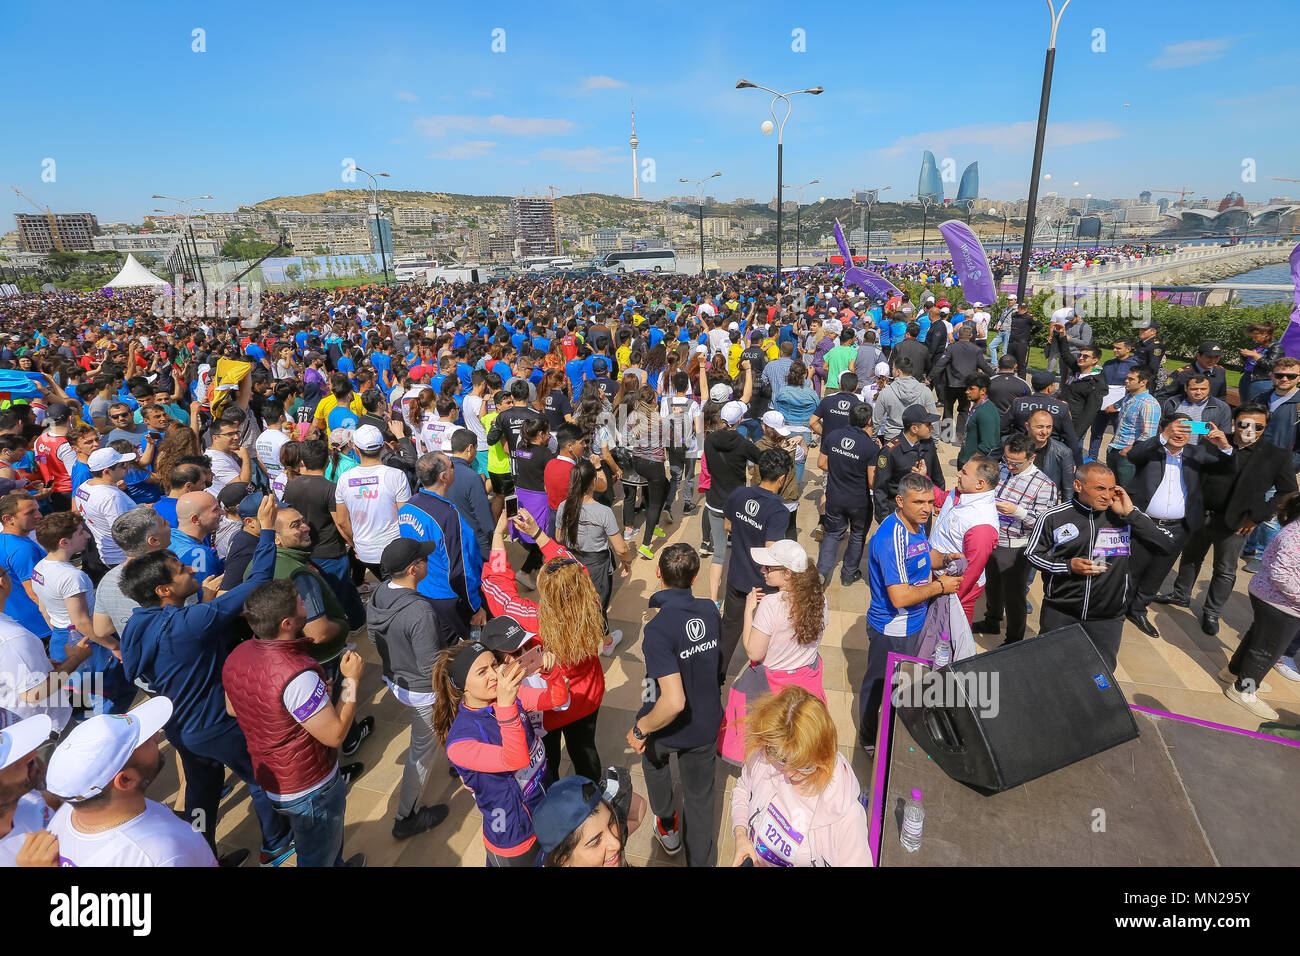 Azerbaijan. 13th May, 2018. Large group of marathon runners in Baku. May 13, 2018. The semi-marathon was cover a distance of 21 kilometers, starting at the national Flag Square and finishing at Baku Olympic Stadium. This year's semi-marathon was open to anyone above the age of 16 upon prior registration, and the event got nearly 18,000 registered participants. Credit: Aziz Karimov/Pacific Press/Alamy Live News Stock Photo